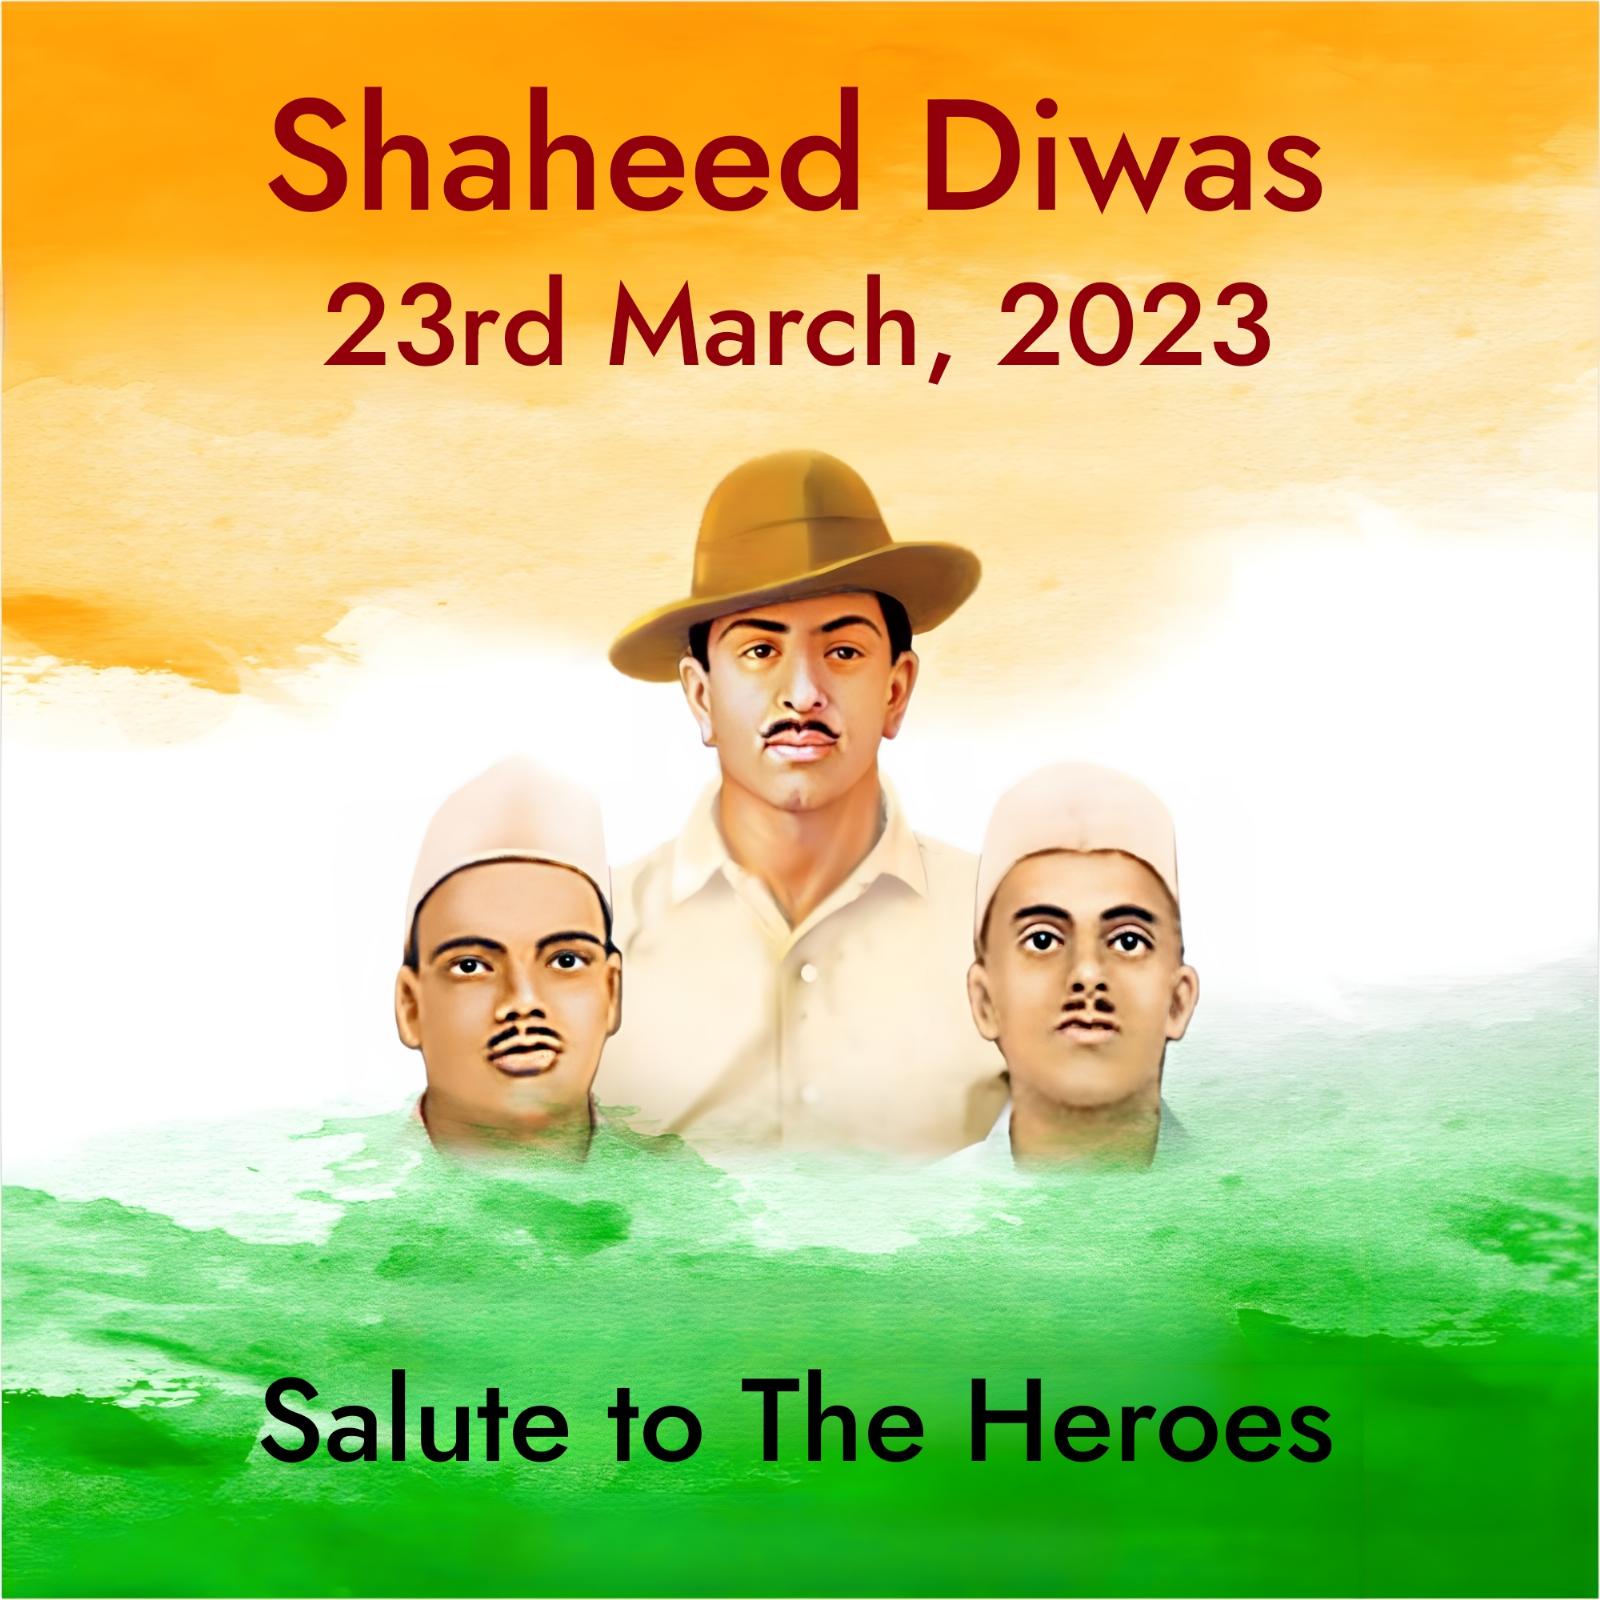 Shaheed Diwas 2023 Salute to The Heroes Images